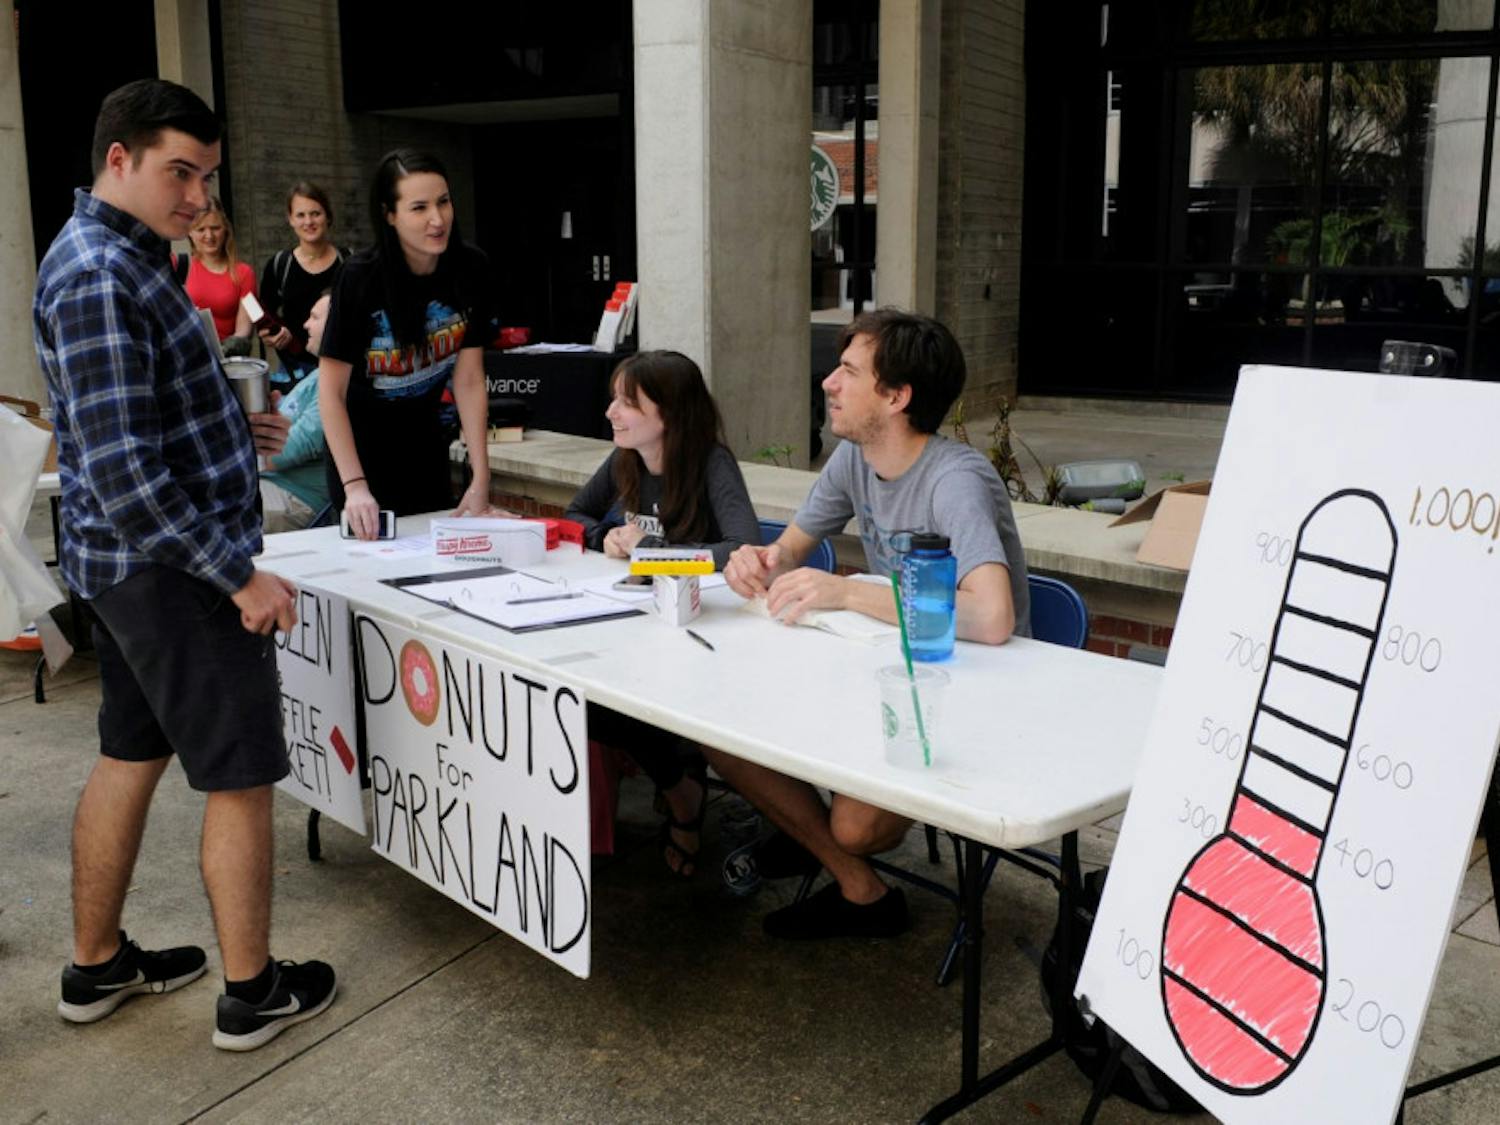 Organizations in the Levin College of Law are creating cards and raising money for victims of the Parkland Shooting through selling donuts. Sheyla Marimon, 24, second-year law student and Andres Perotti, 24, second-year law student are working to garner support. They had reached $400 of the $1000 goal at the time that this photo was taken.
&nbsp;